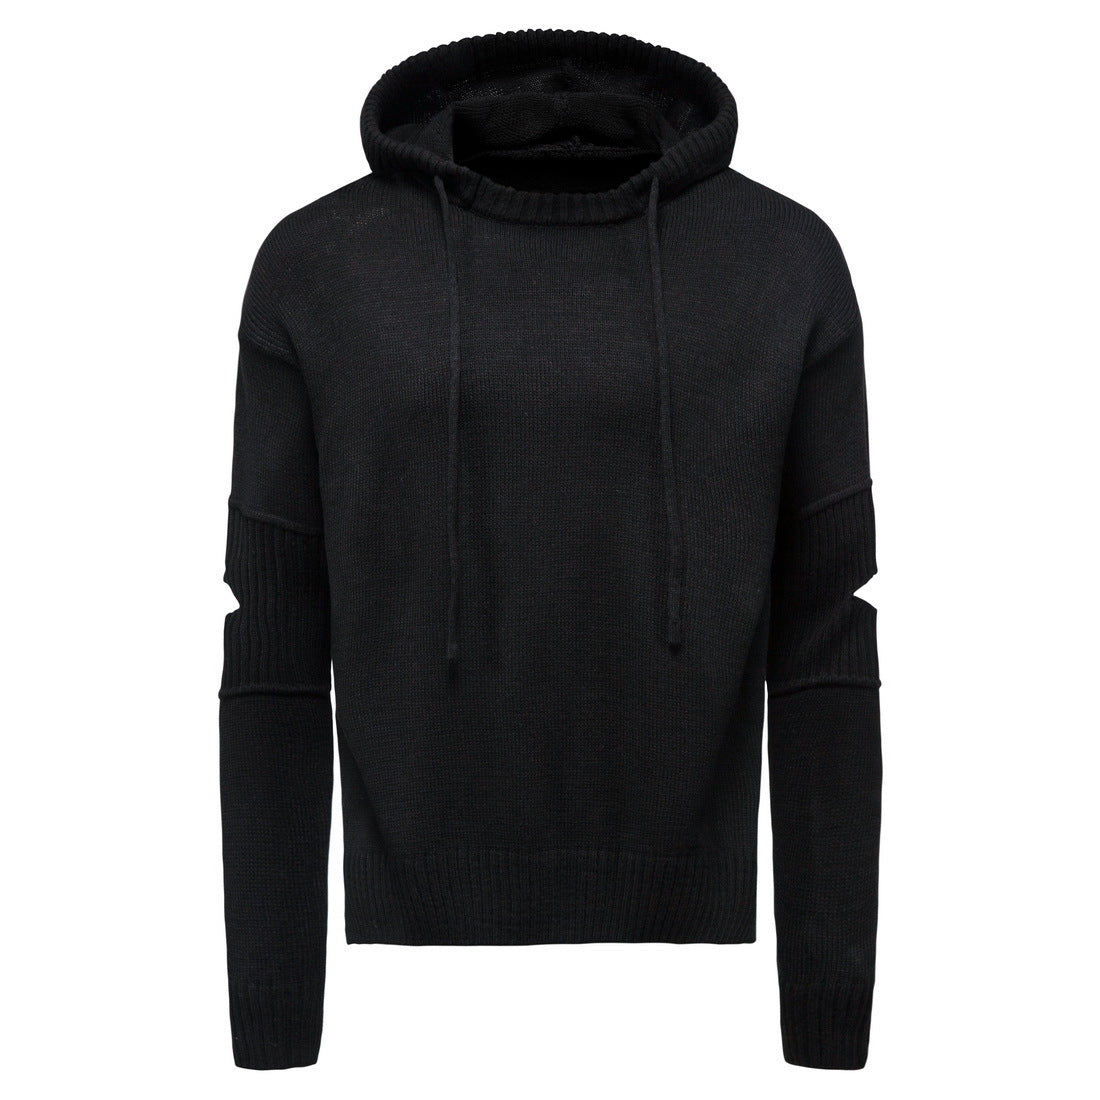 Sidiou Group Anniou Men Hooded Casual Sweater Holes Pullovers Sweatercoats New Fashion Slim Fit Outwear Knitting Sweaters